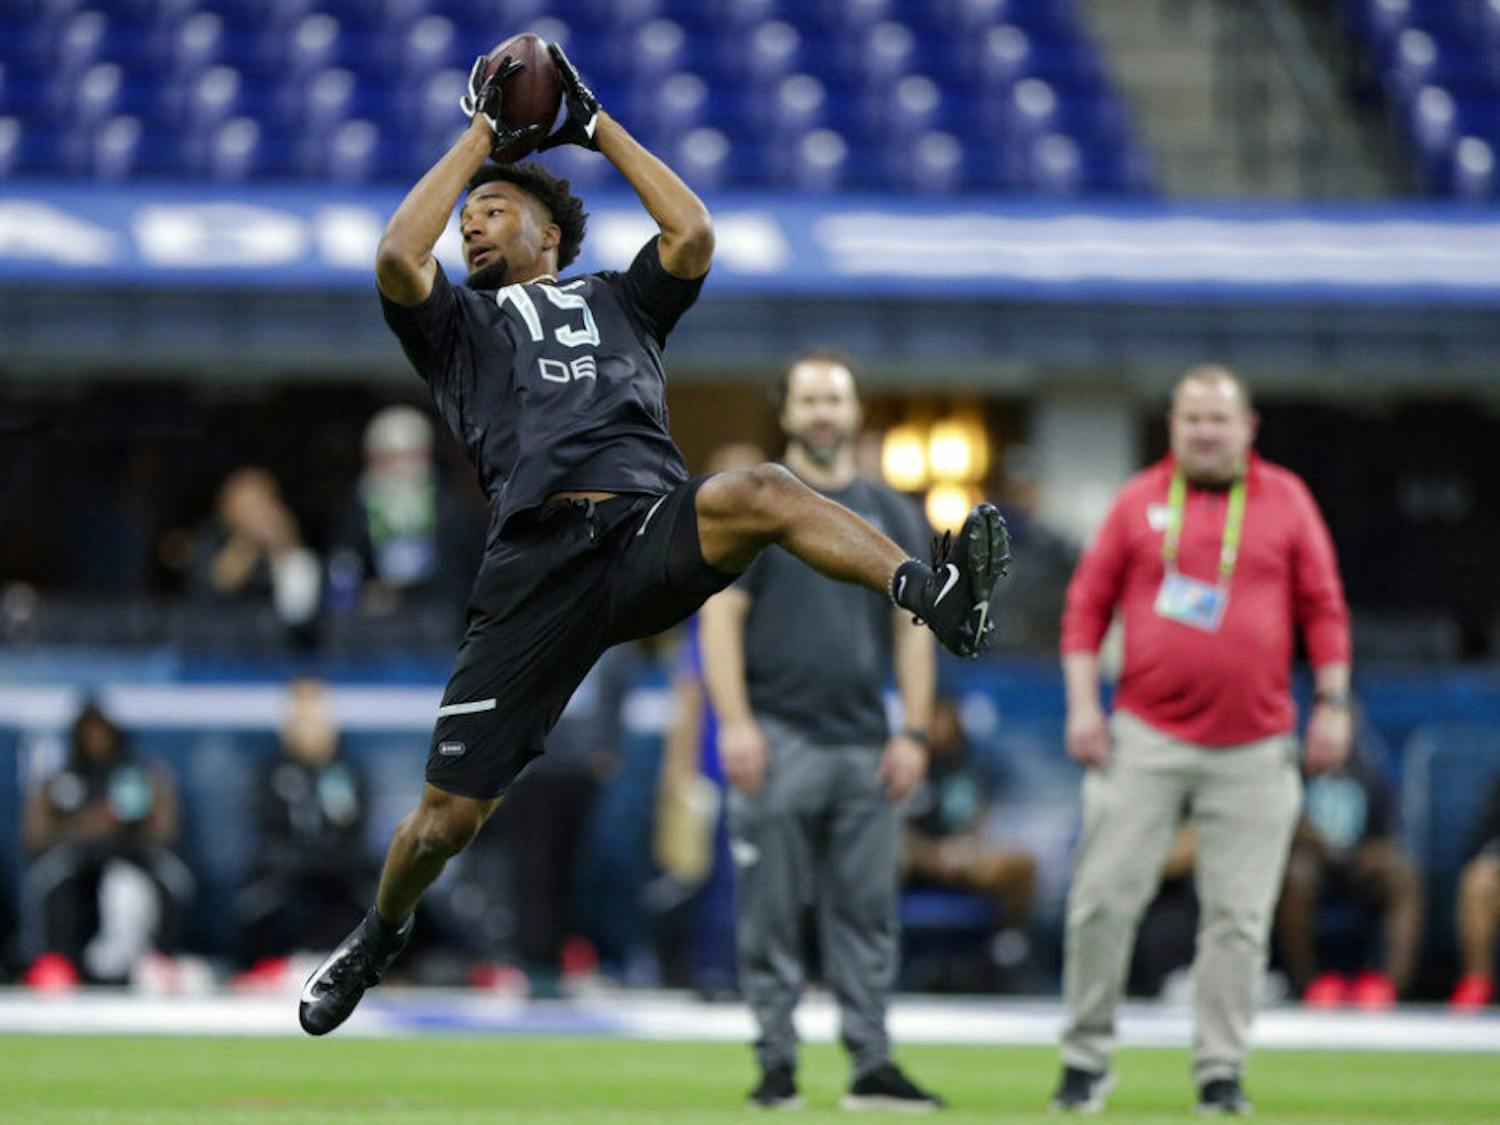 Florida defensive back C J Henderson runs a drill at the NFL football scouting combine in Indianapolis, Sunday, March 1, 2020. (AP Photo/Michael Conroy)